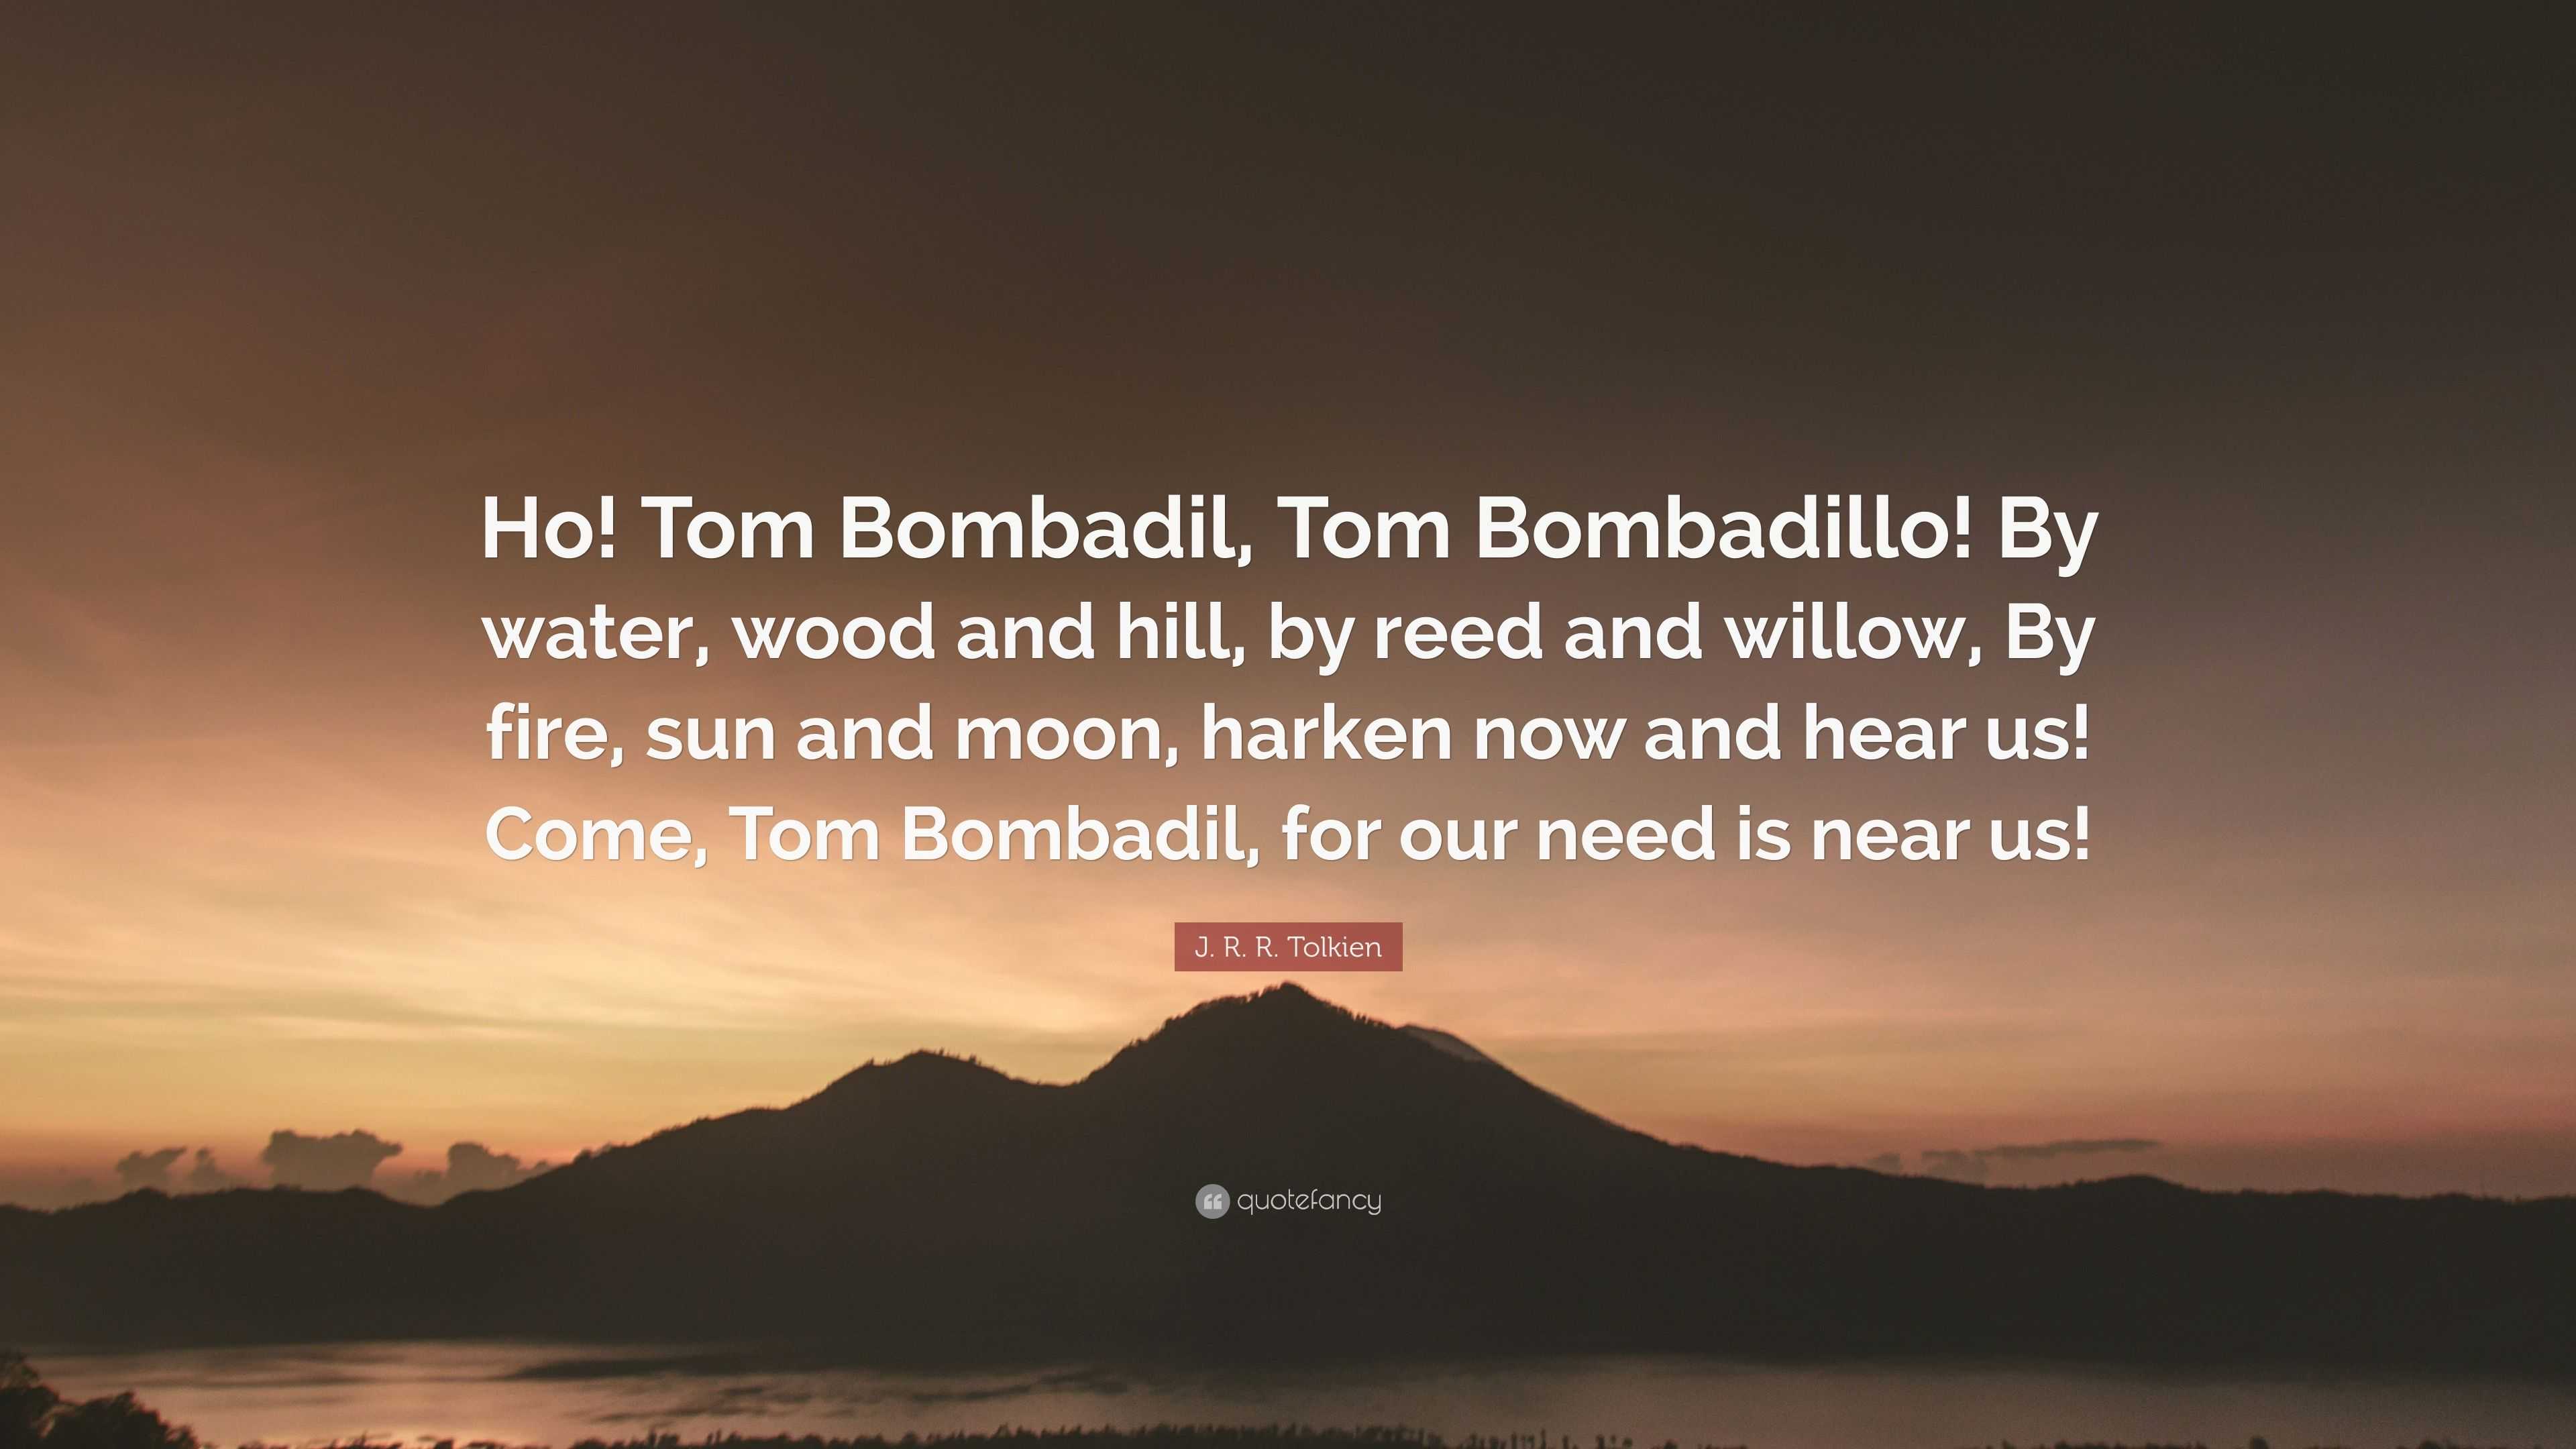 J R R Tolkien Quote Ho Tom Bombadil Tom Bombadillo By Water Wood And Hill By Reed And Willow By Fire Sun And Moon Harken Now And Hea 7 Wallpapers Quotefancy Tom bom, jolly tom, tom bombadillo! j r r tolkien quote ho tom